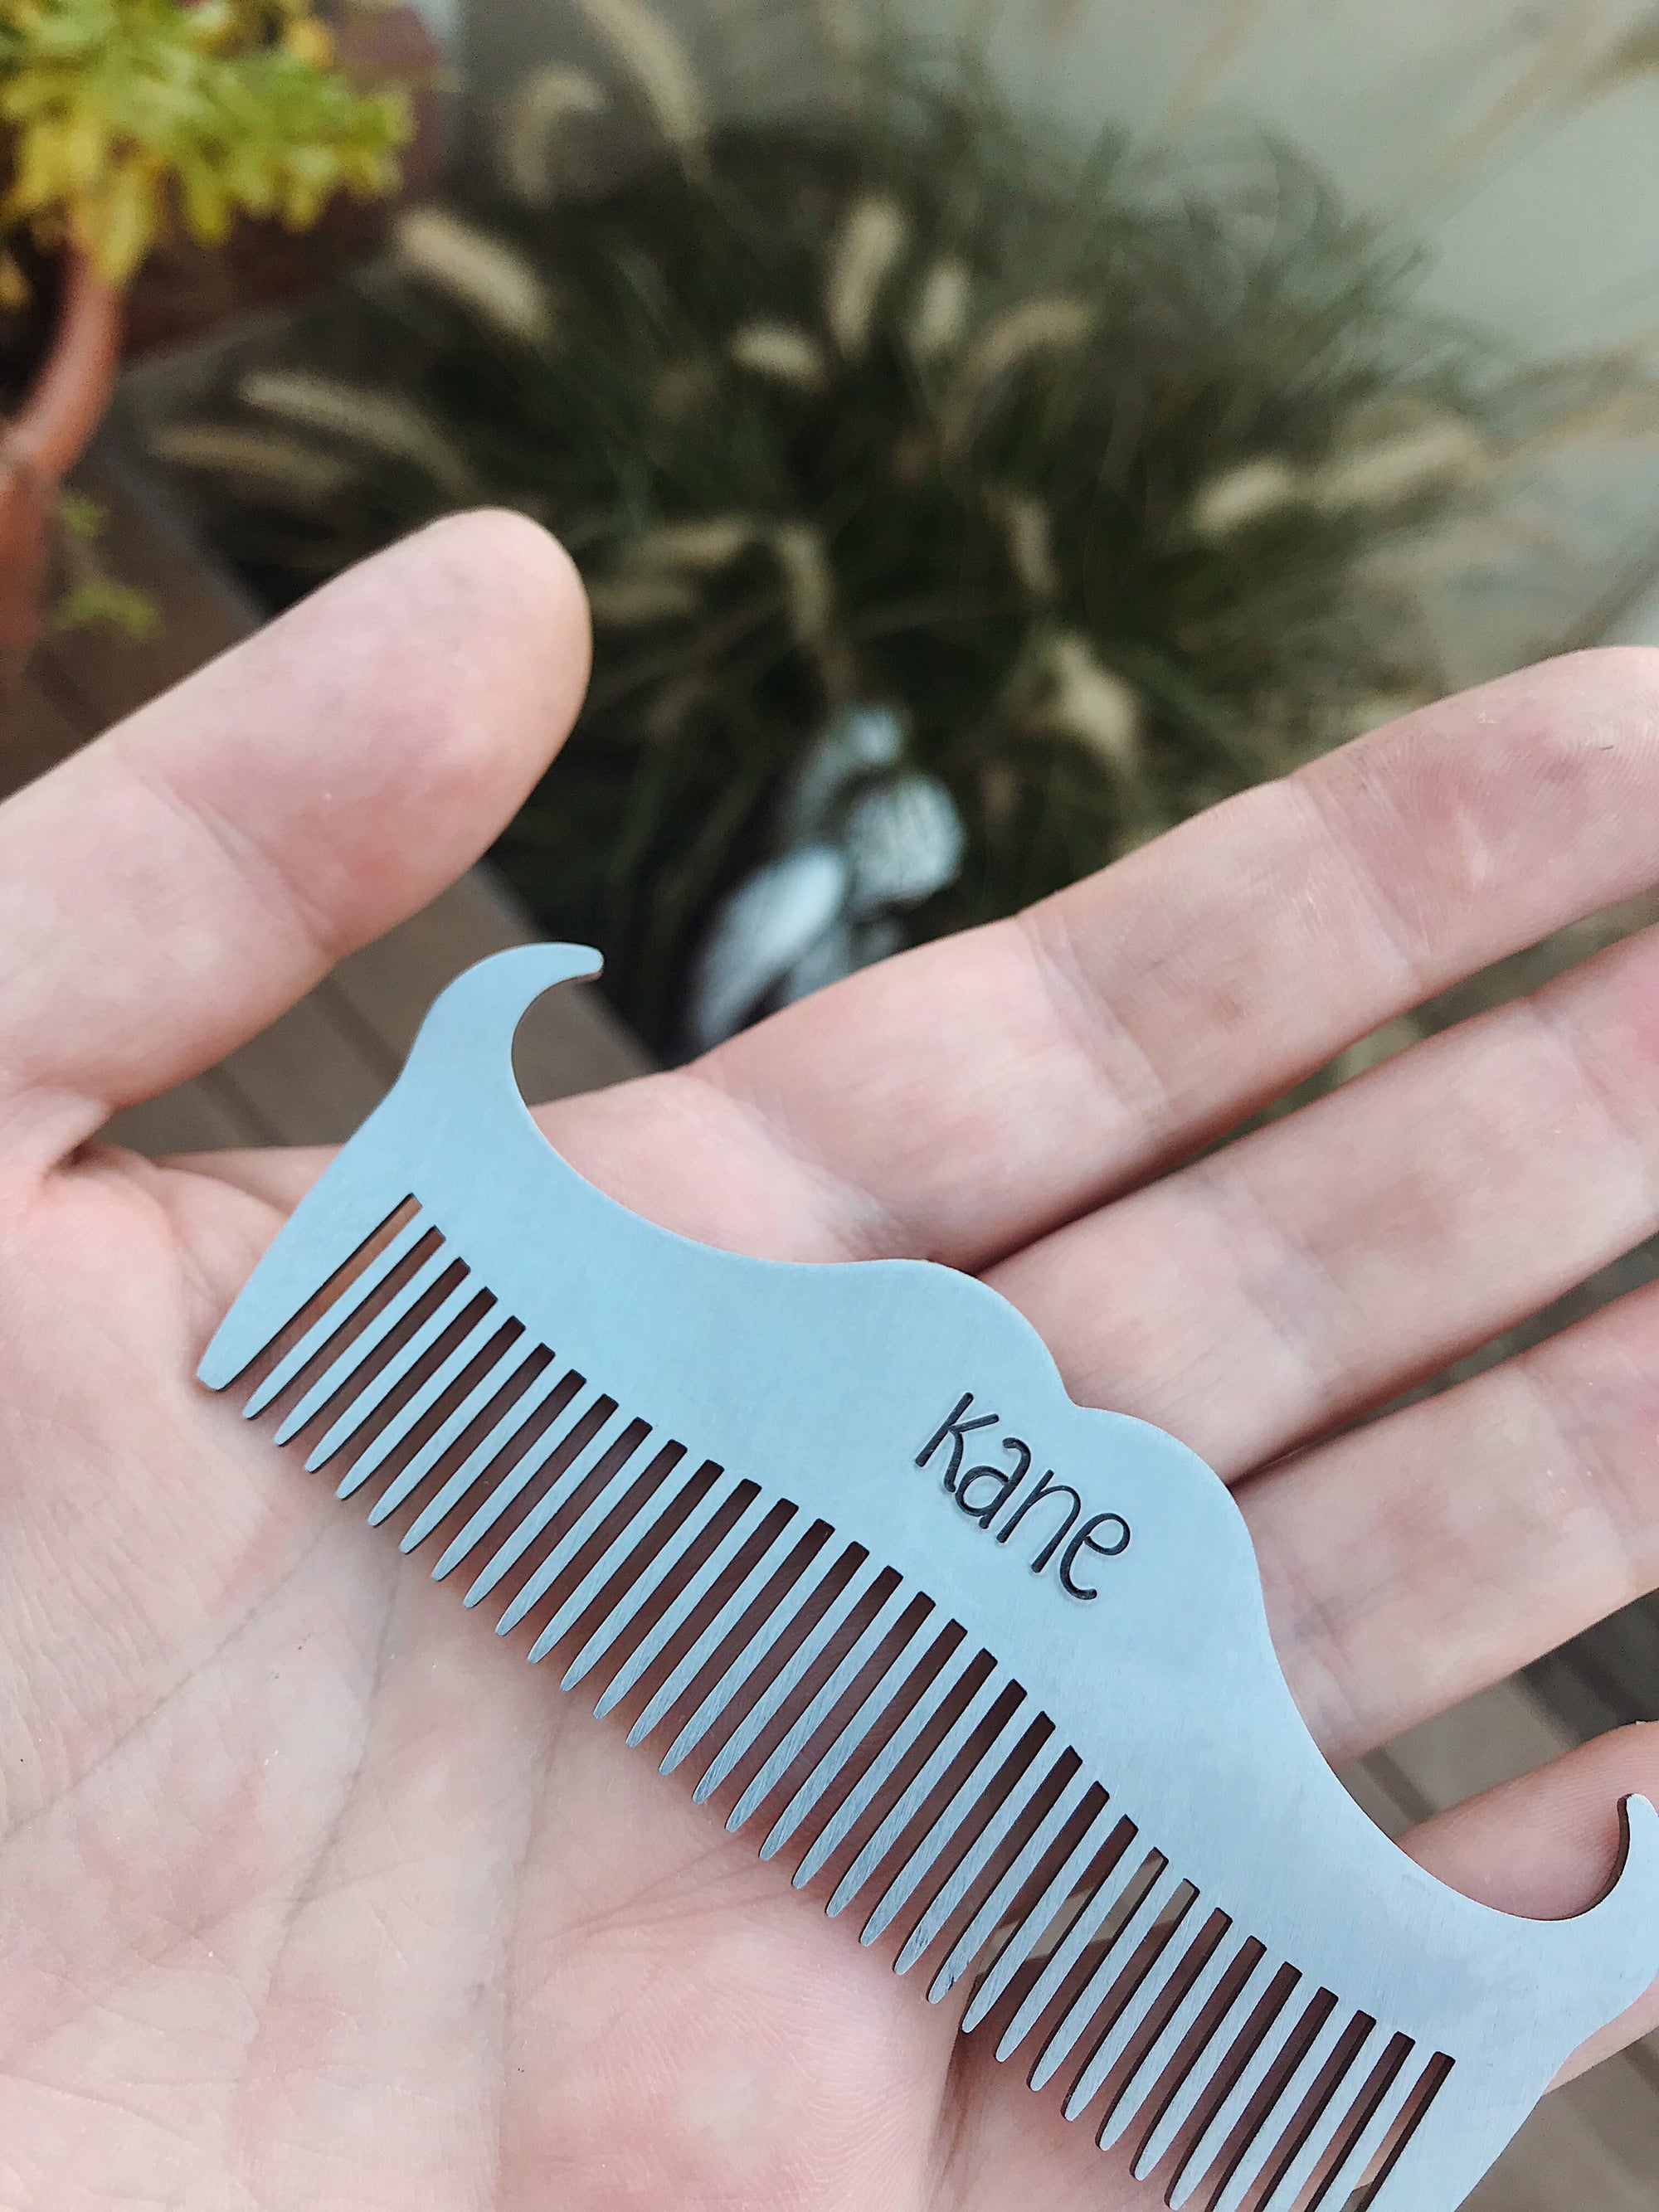 Mens Valentines Gift | Custom Mustache Comb | Father's Day Gift | Personalized Stainless Steel Beard Comb for Dad | Mustache Care